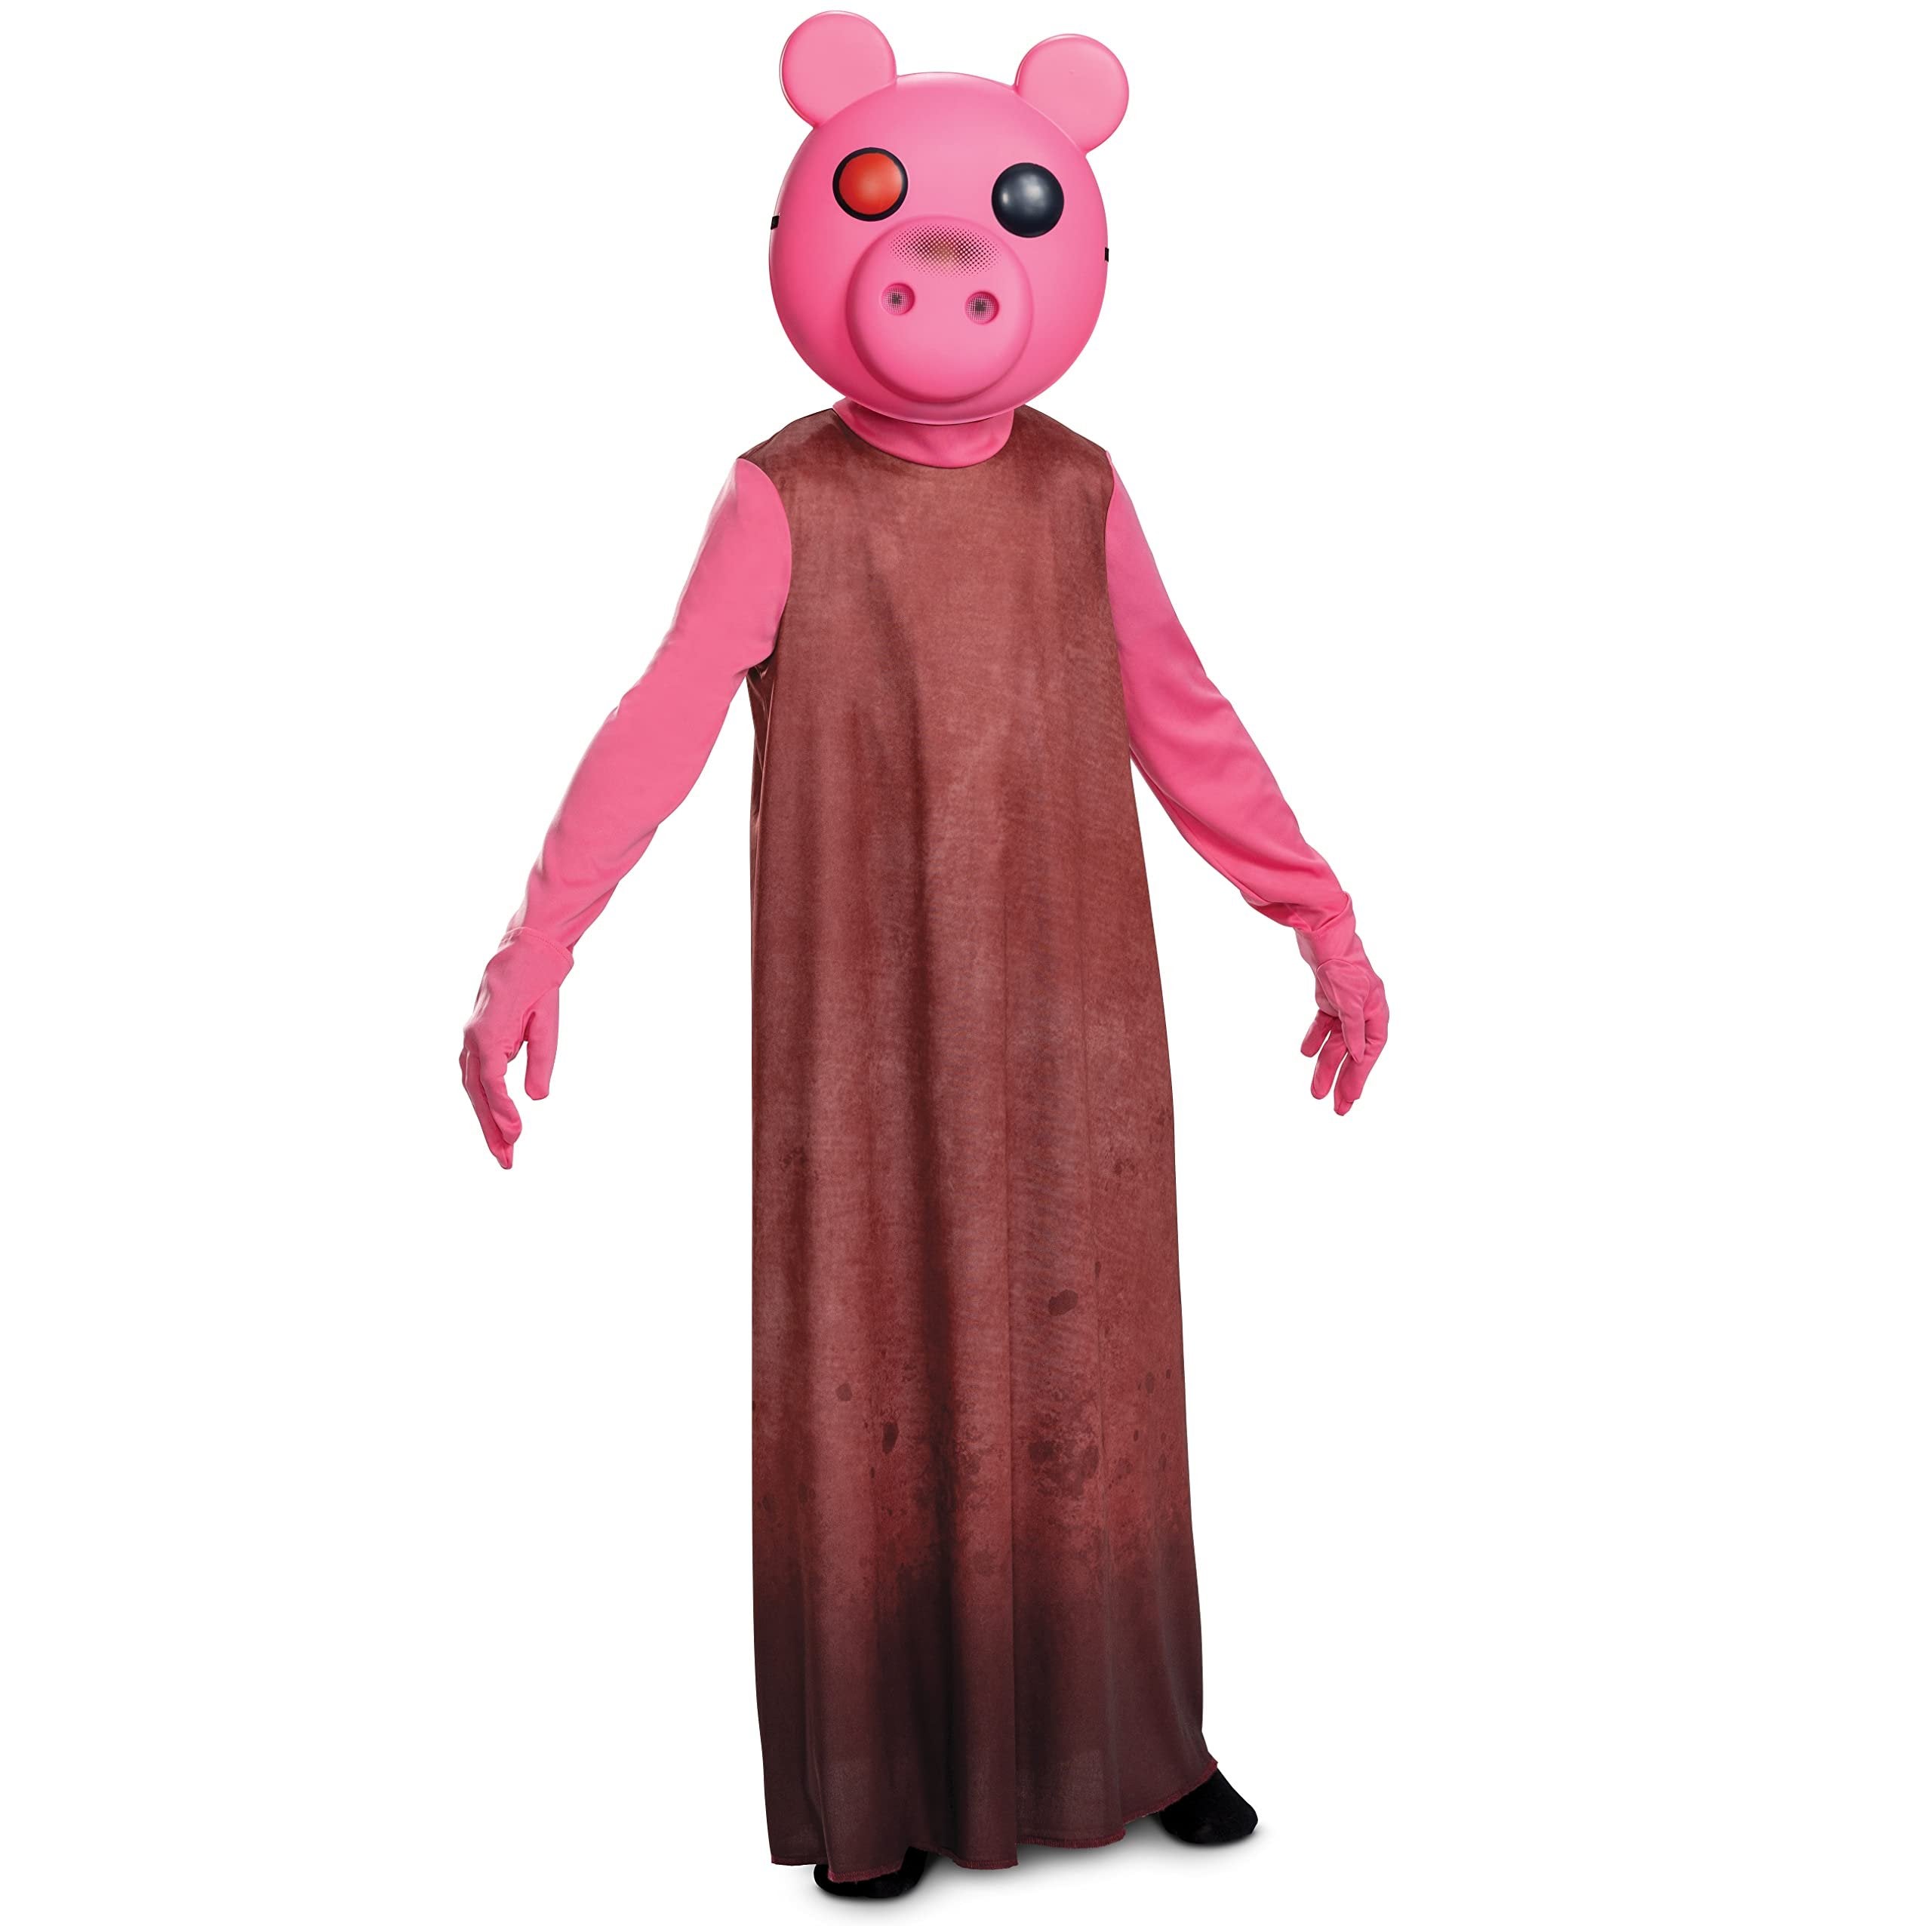 Piggy Costume for Kids, Official Piggy Video Game Costume Outfit and Mask, Size (7-8)